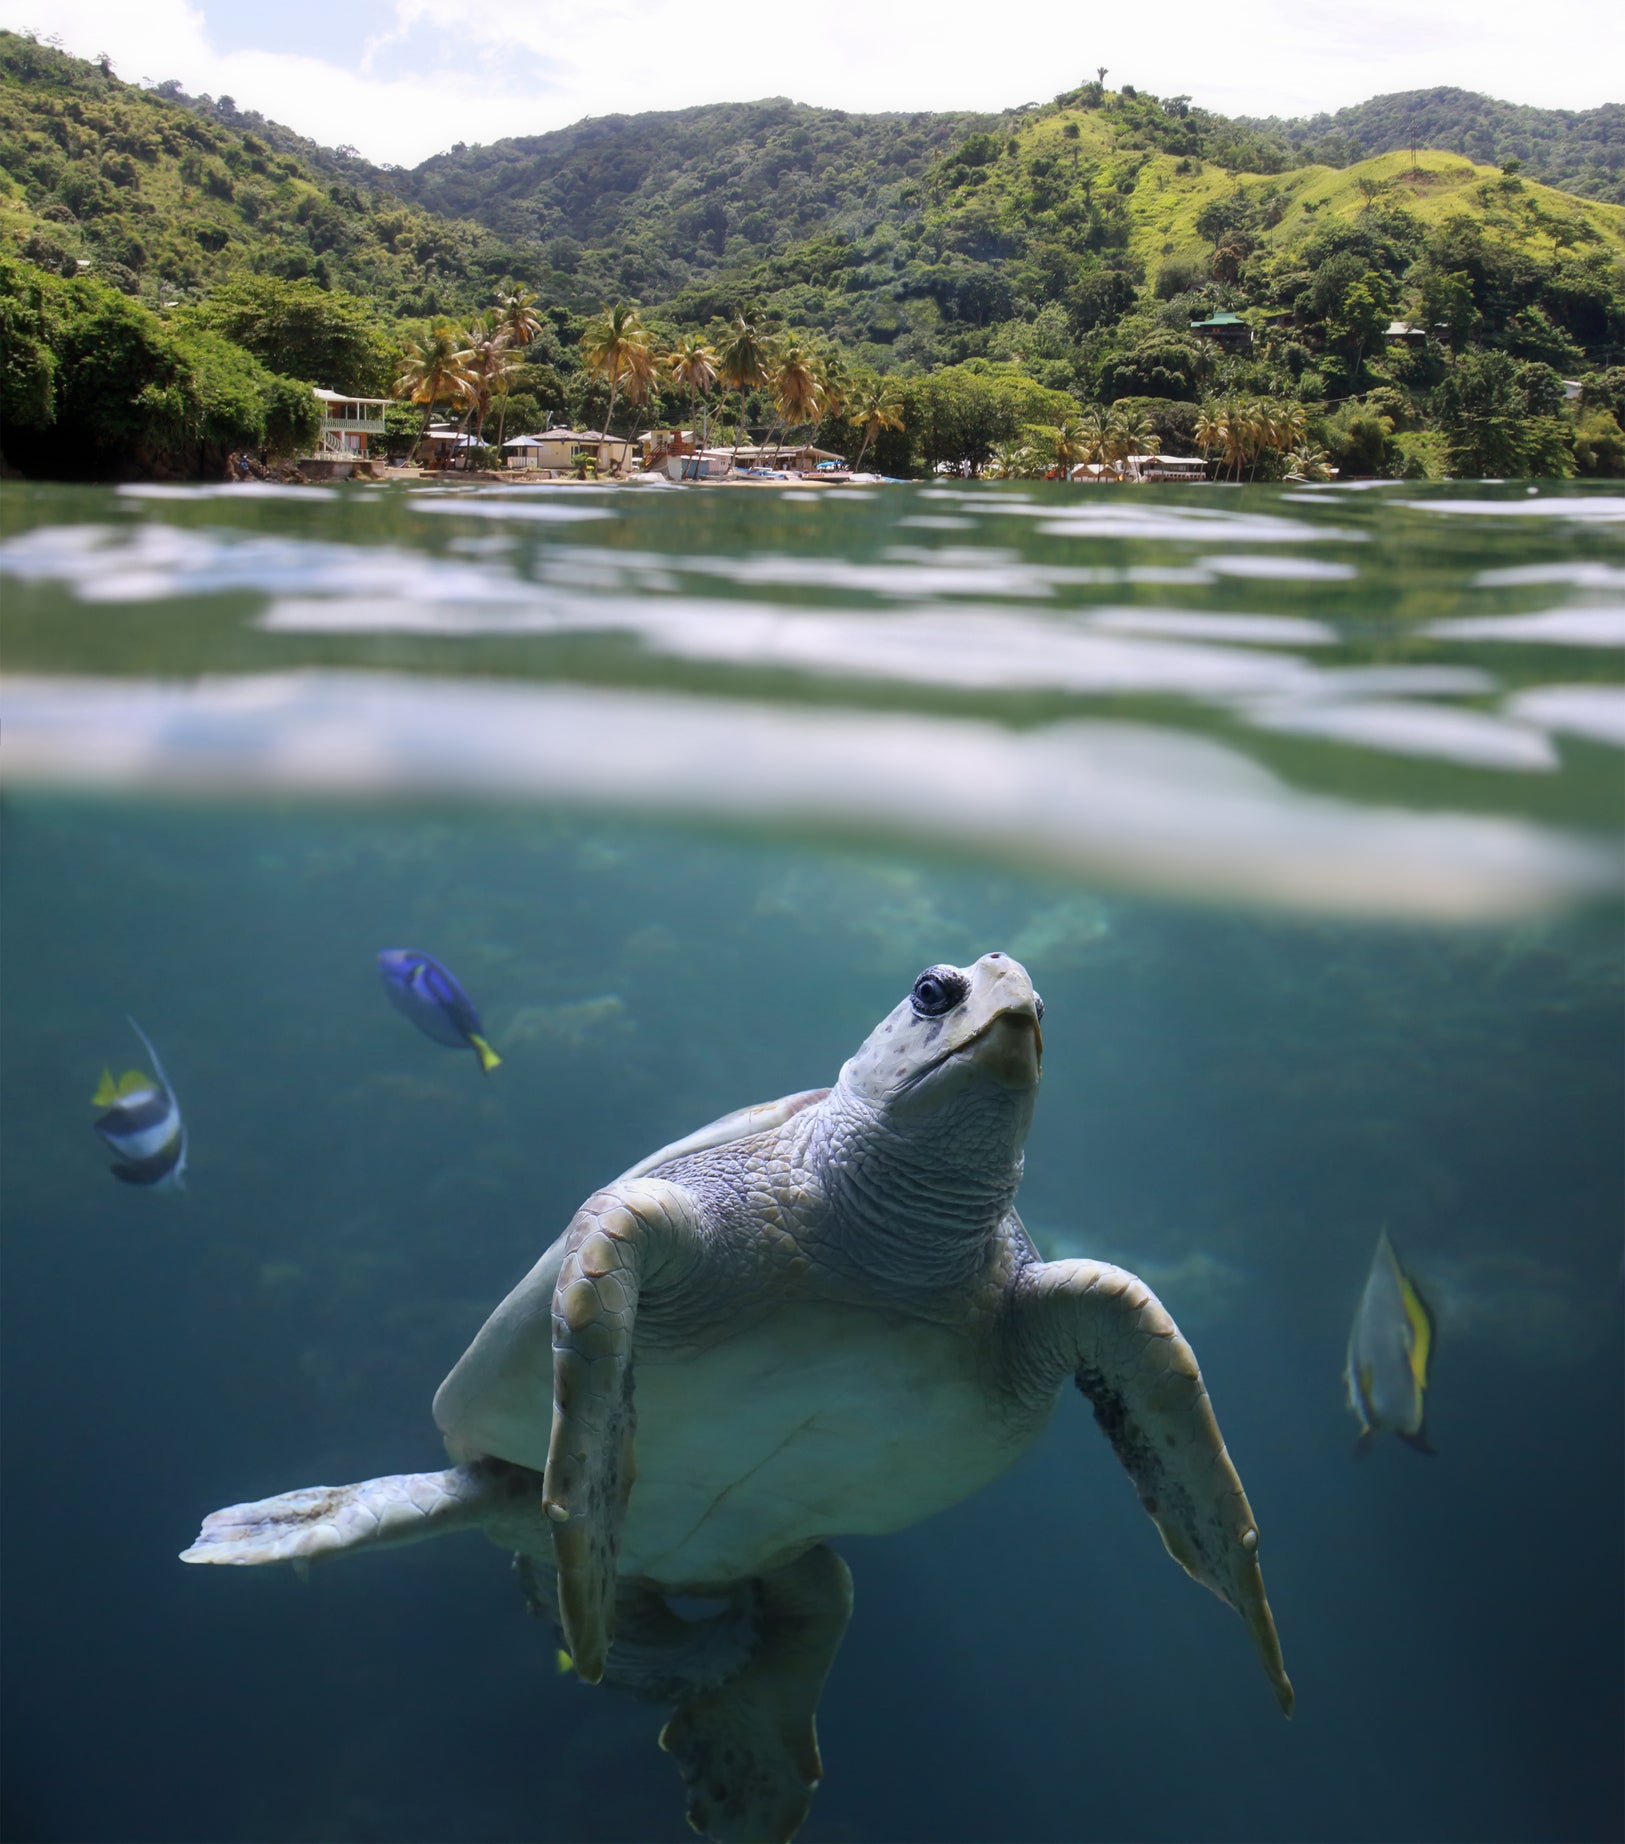 Speyside in Tobago is home to a diverse array of marine life